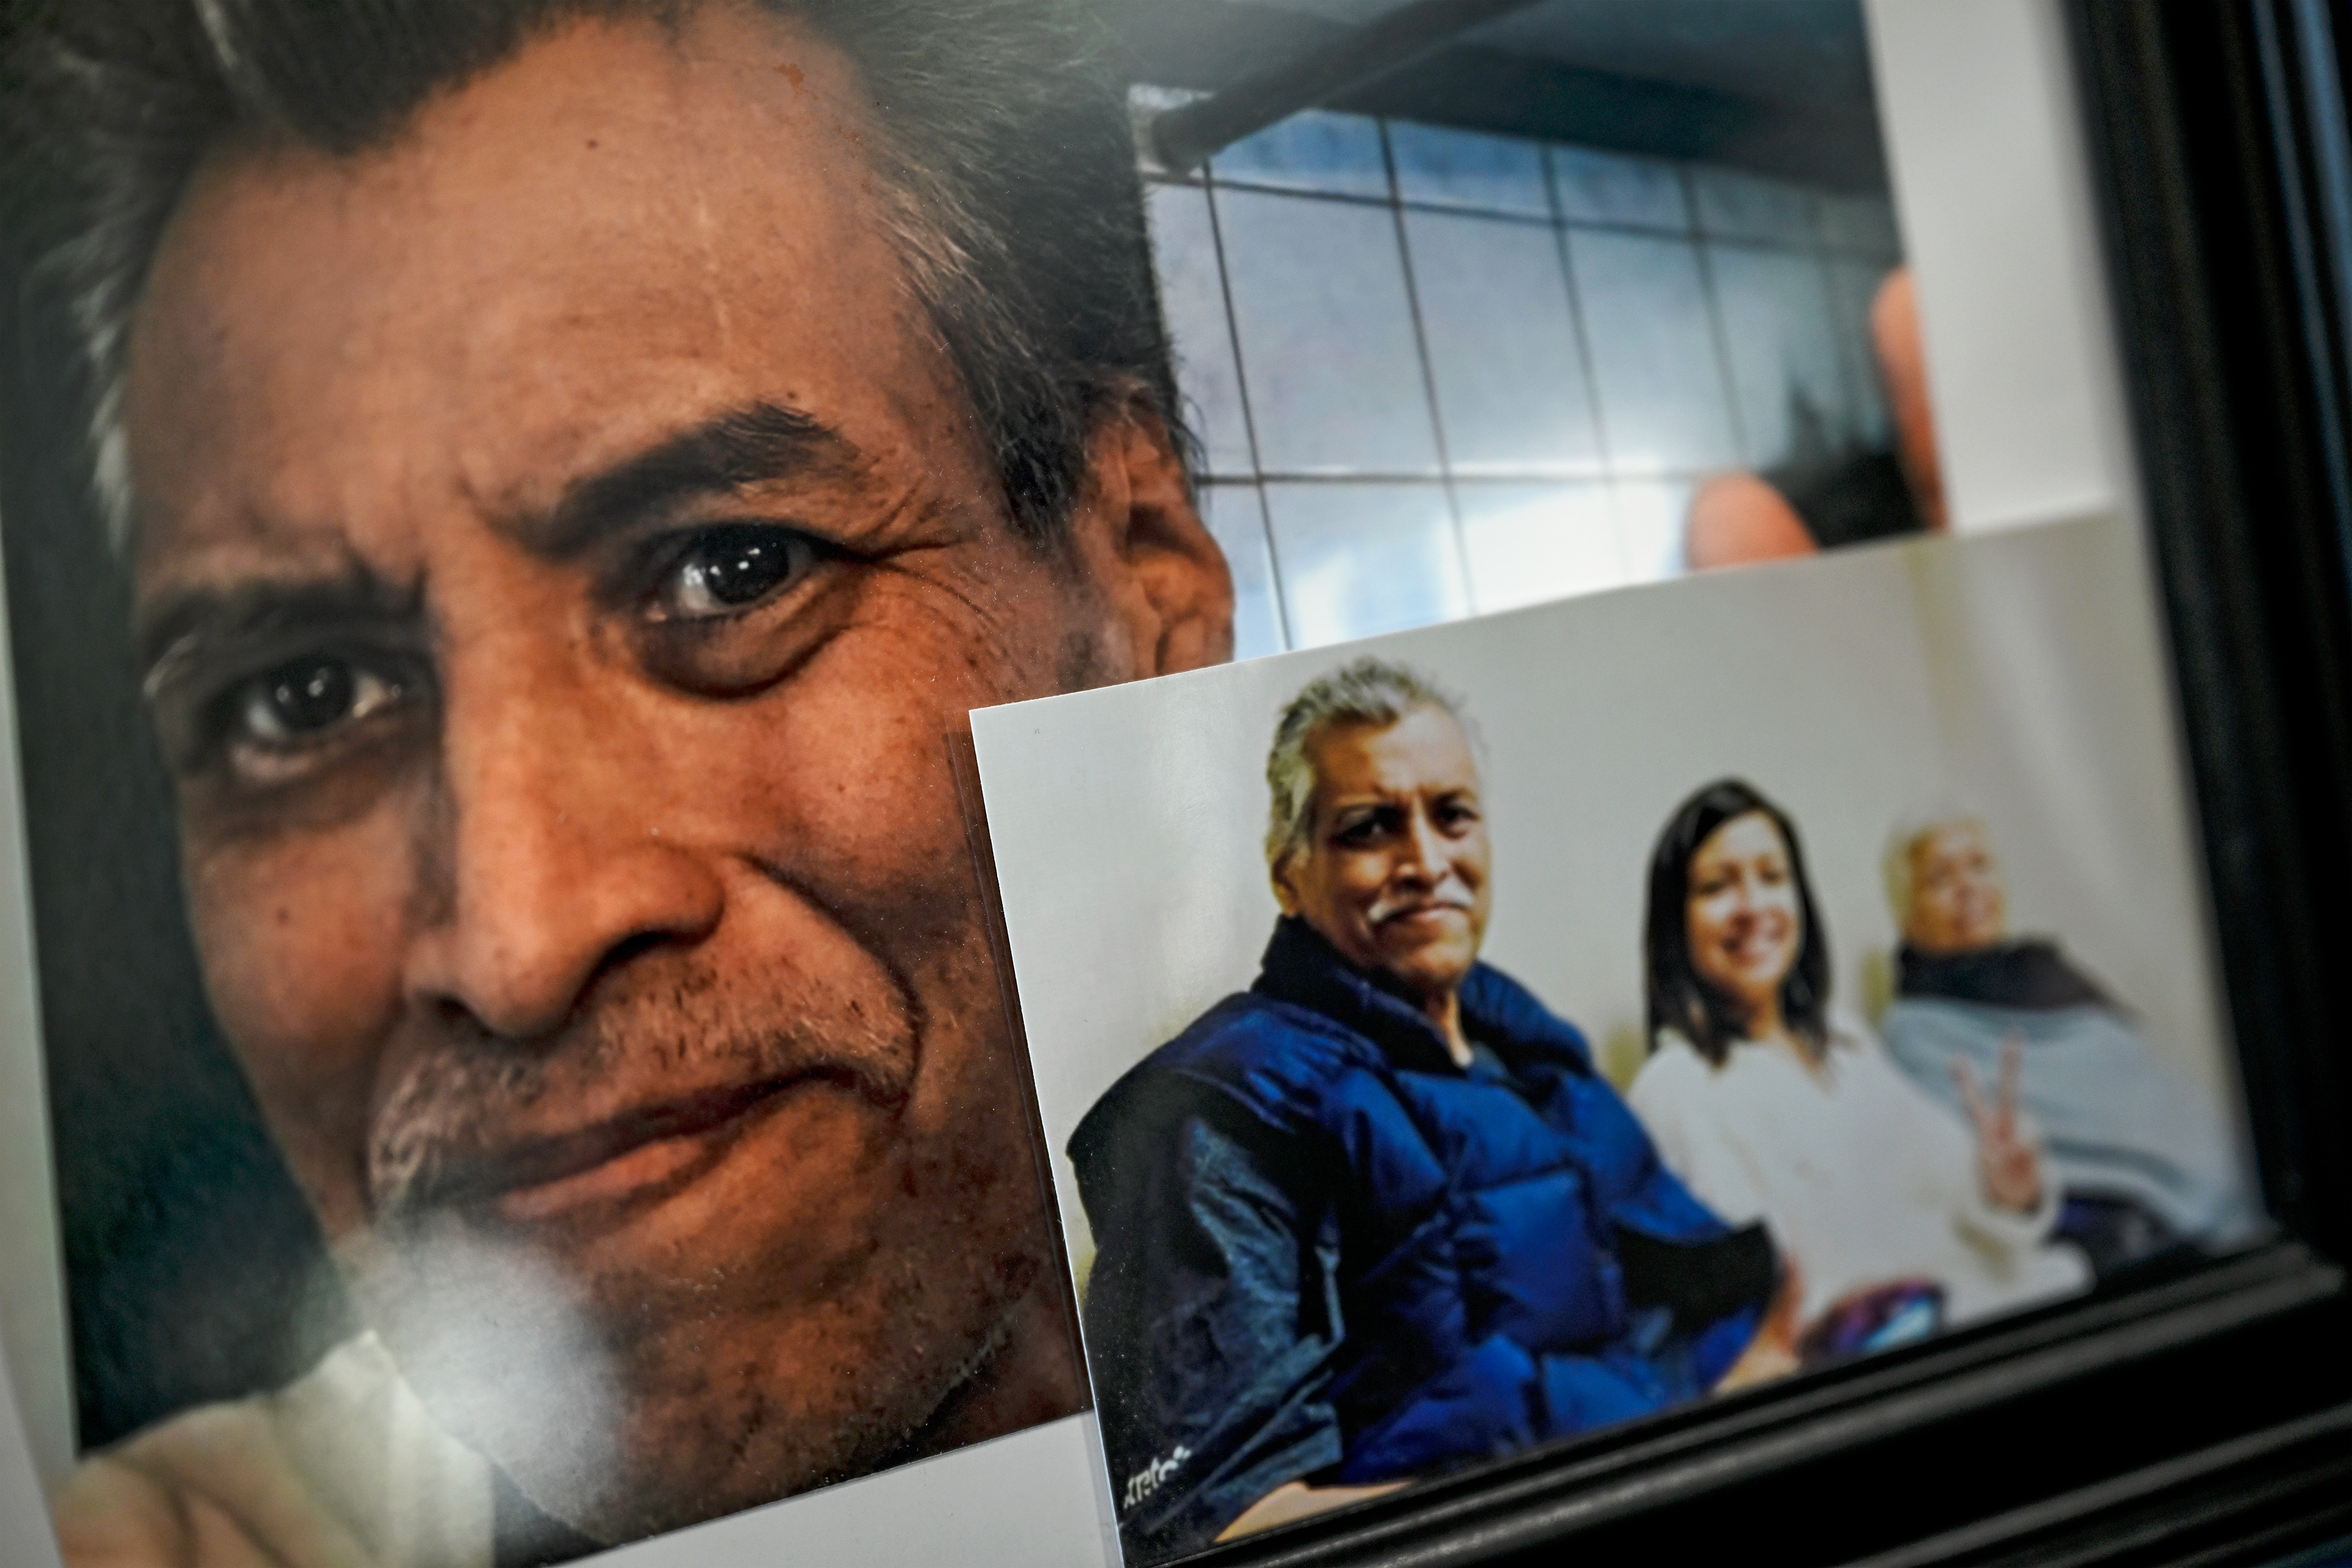 A photo shows two portraits of Armando Peniche Rosales' father and his family in a picture frame.